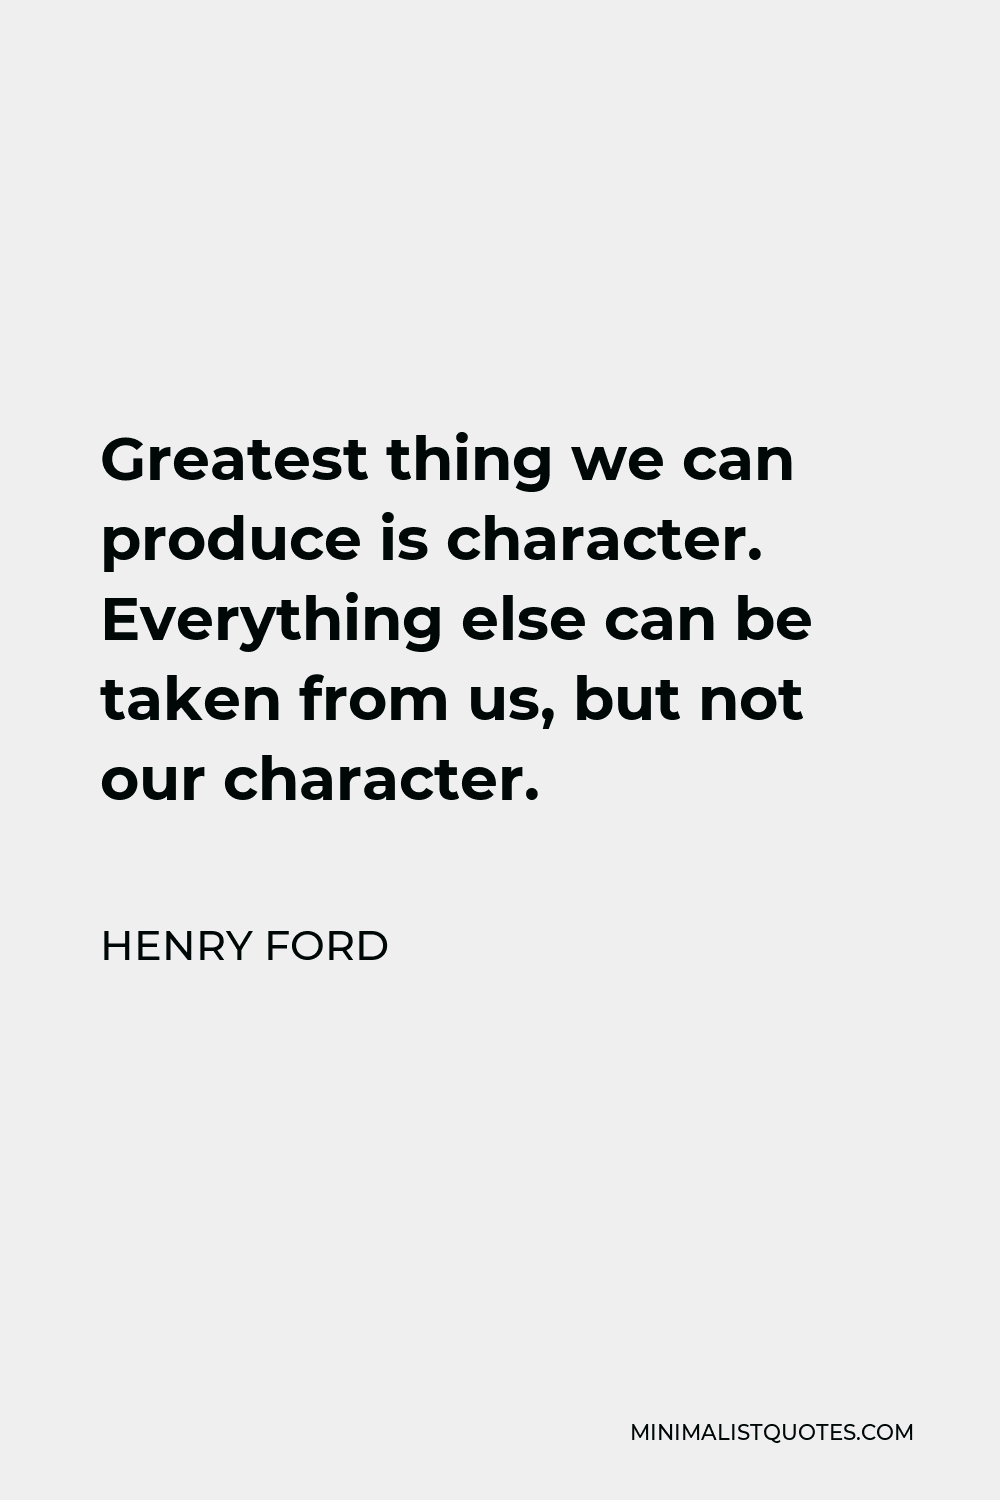 Henry Ford Quote - Greatest thing we can produce is character. Everything else can be taken from us, but not our character.